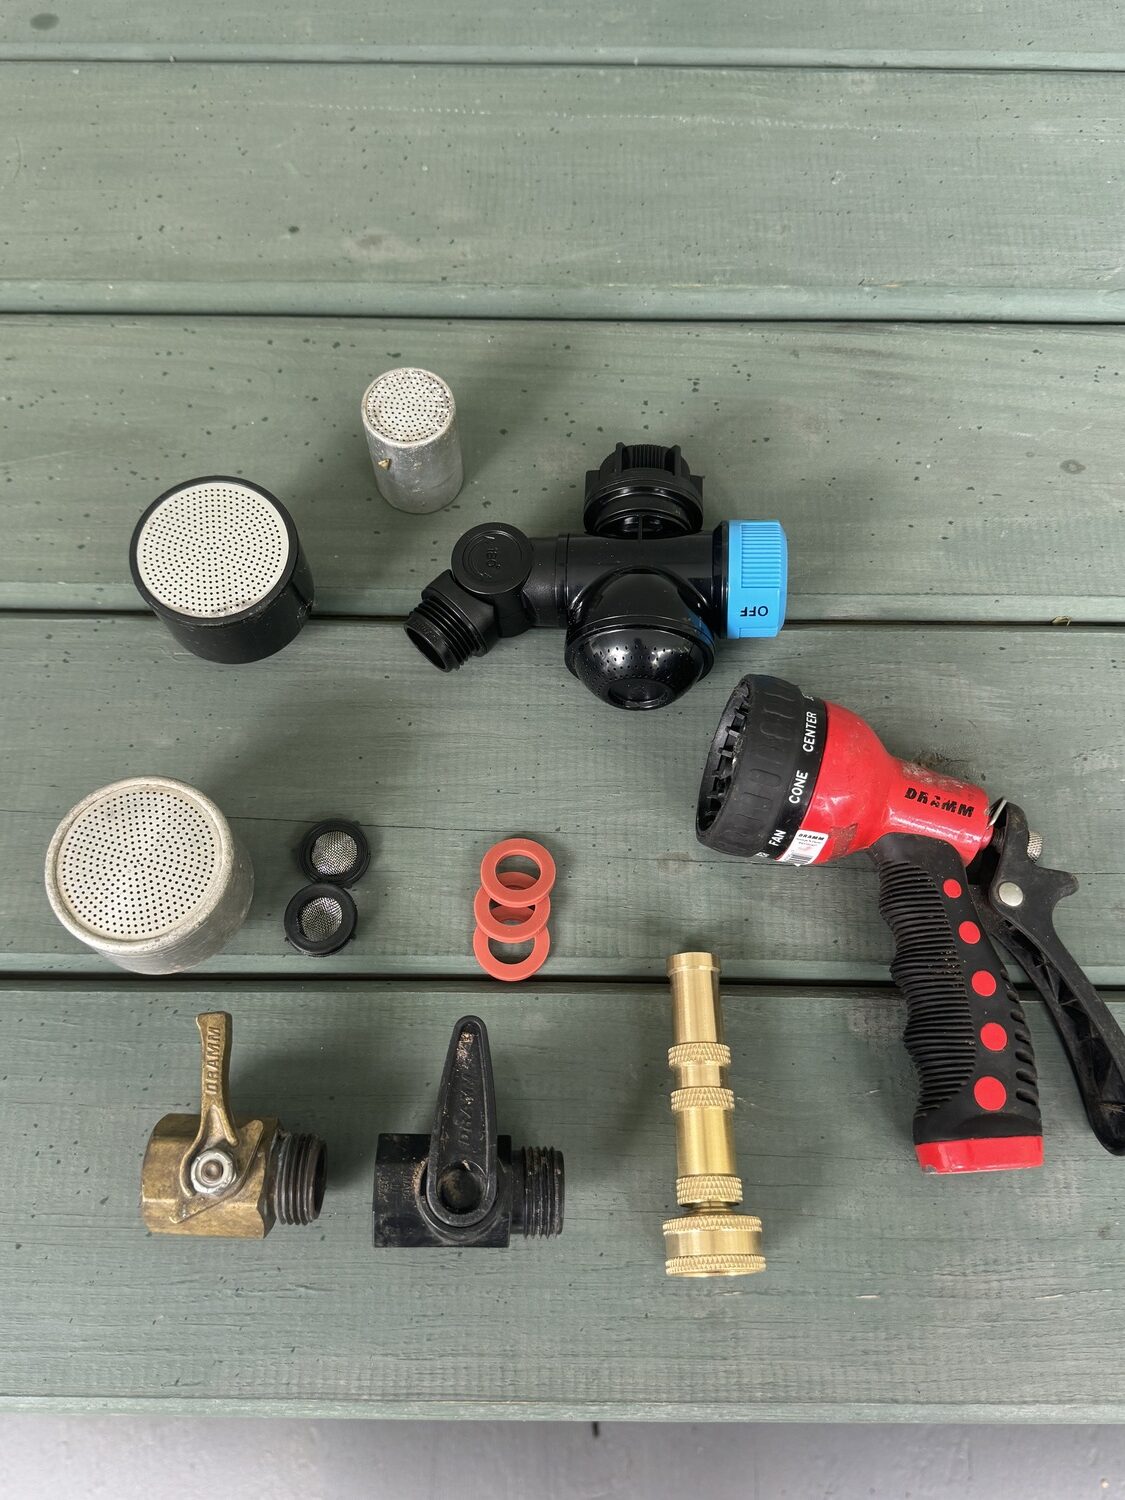 A collection of watering tools. On the bottom are a brass control valve (left) which will last for years and is repairable. The plastic valve to the right is easily broken. To the right is a brass 4-inch twist nozzle that goes from a fine spray to a stream with a twist of the barrel. Top left are three Dramm watering heads. The metal is preferred to the plastic as they last longer. To the right is a new gadget that allows you to run a hose off your hose bib and an on/off to control the perforated output for washing your hands or tools.  In the center are hose washers with screens, and to the right are standard (preferred) rubber washers. On the far right is a hose-end watering head with 10 settings from a fine spray to a stream and all in between.  These tend to break easily and make a mess when in use. ANDREW MESSINGER